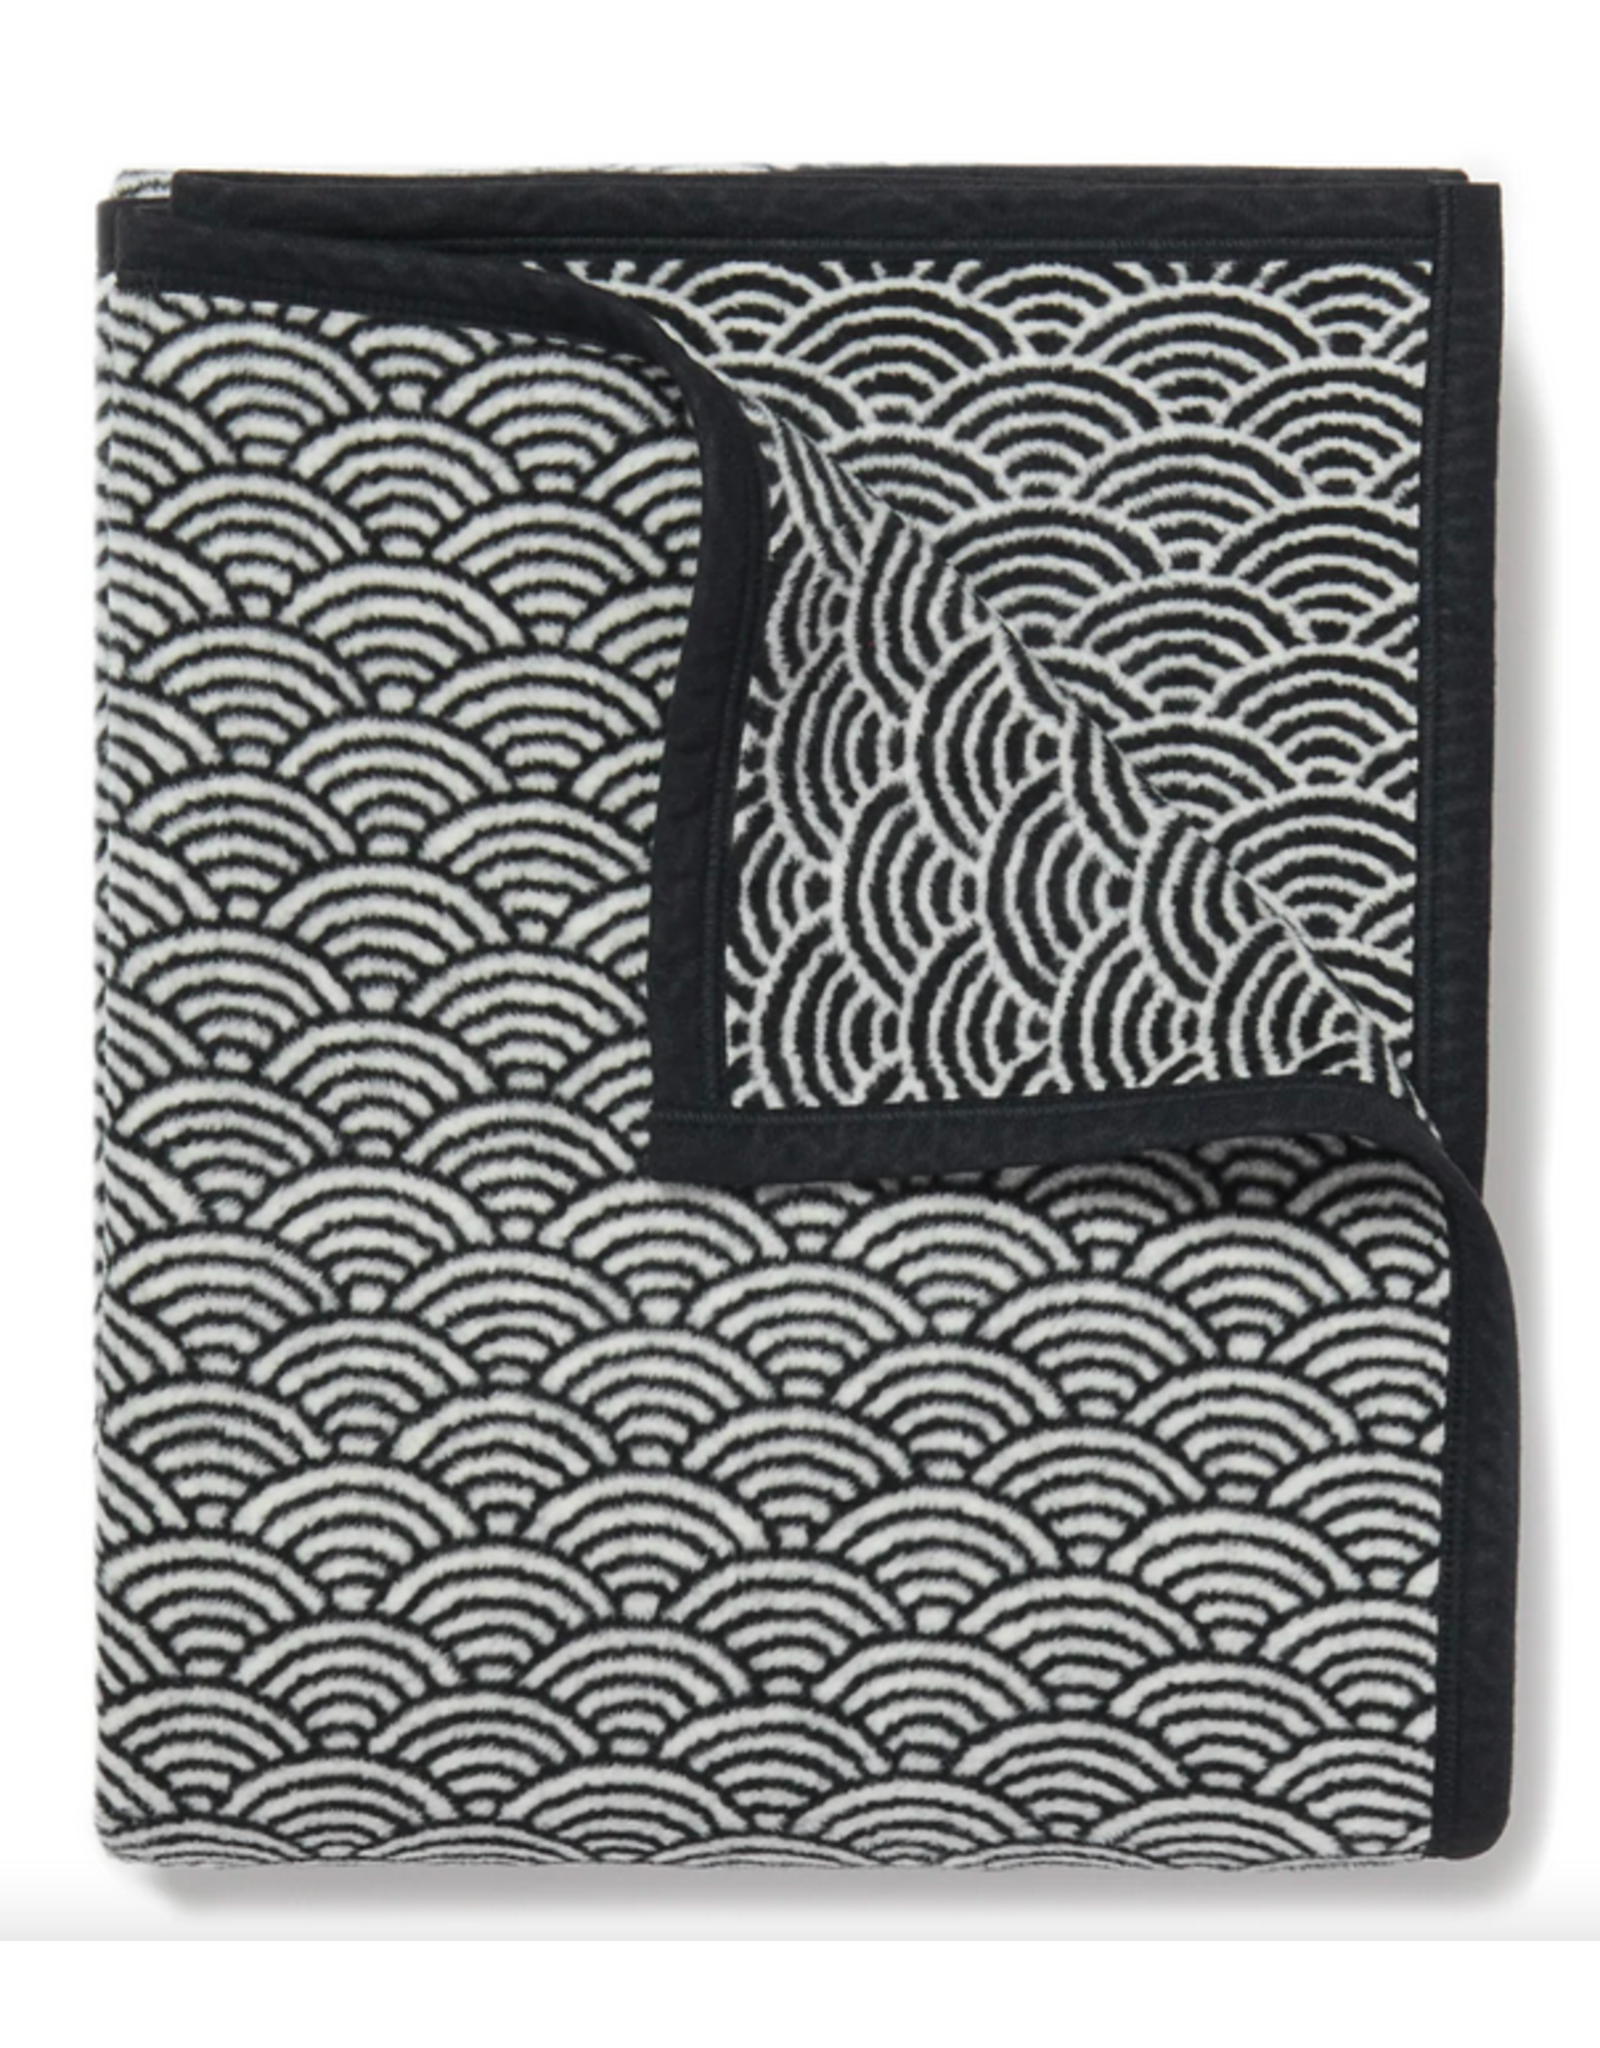 ChappyWrap Brewster Scallops in Black and White Blanket by ChappyWrap